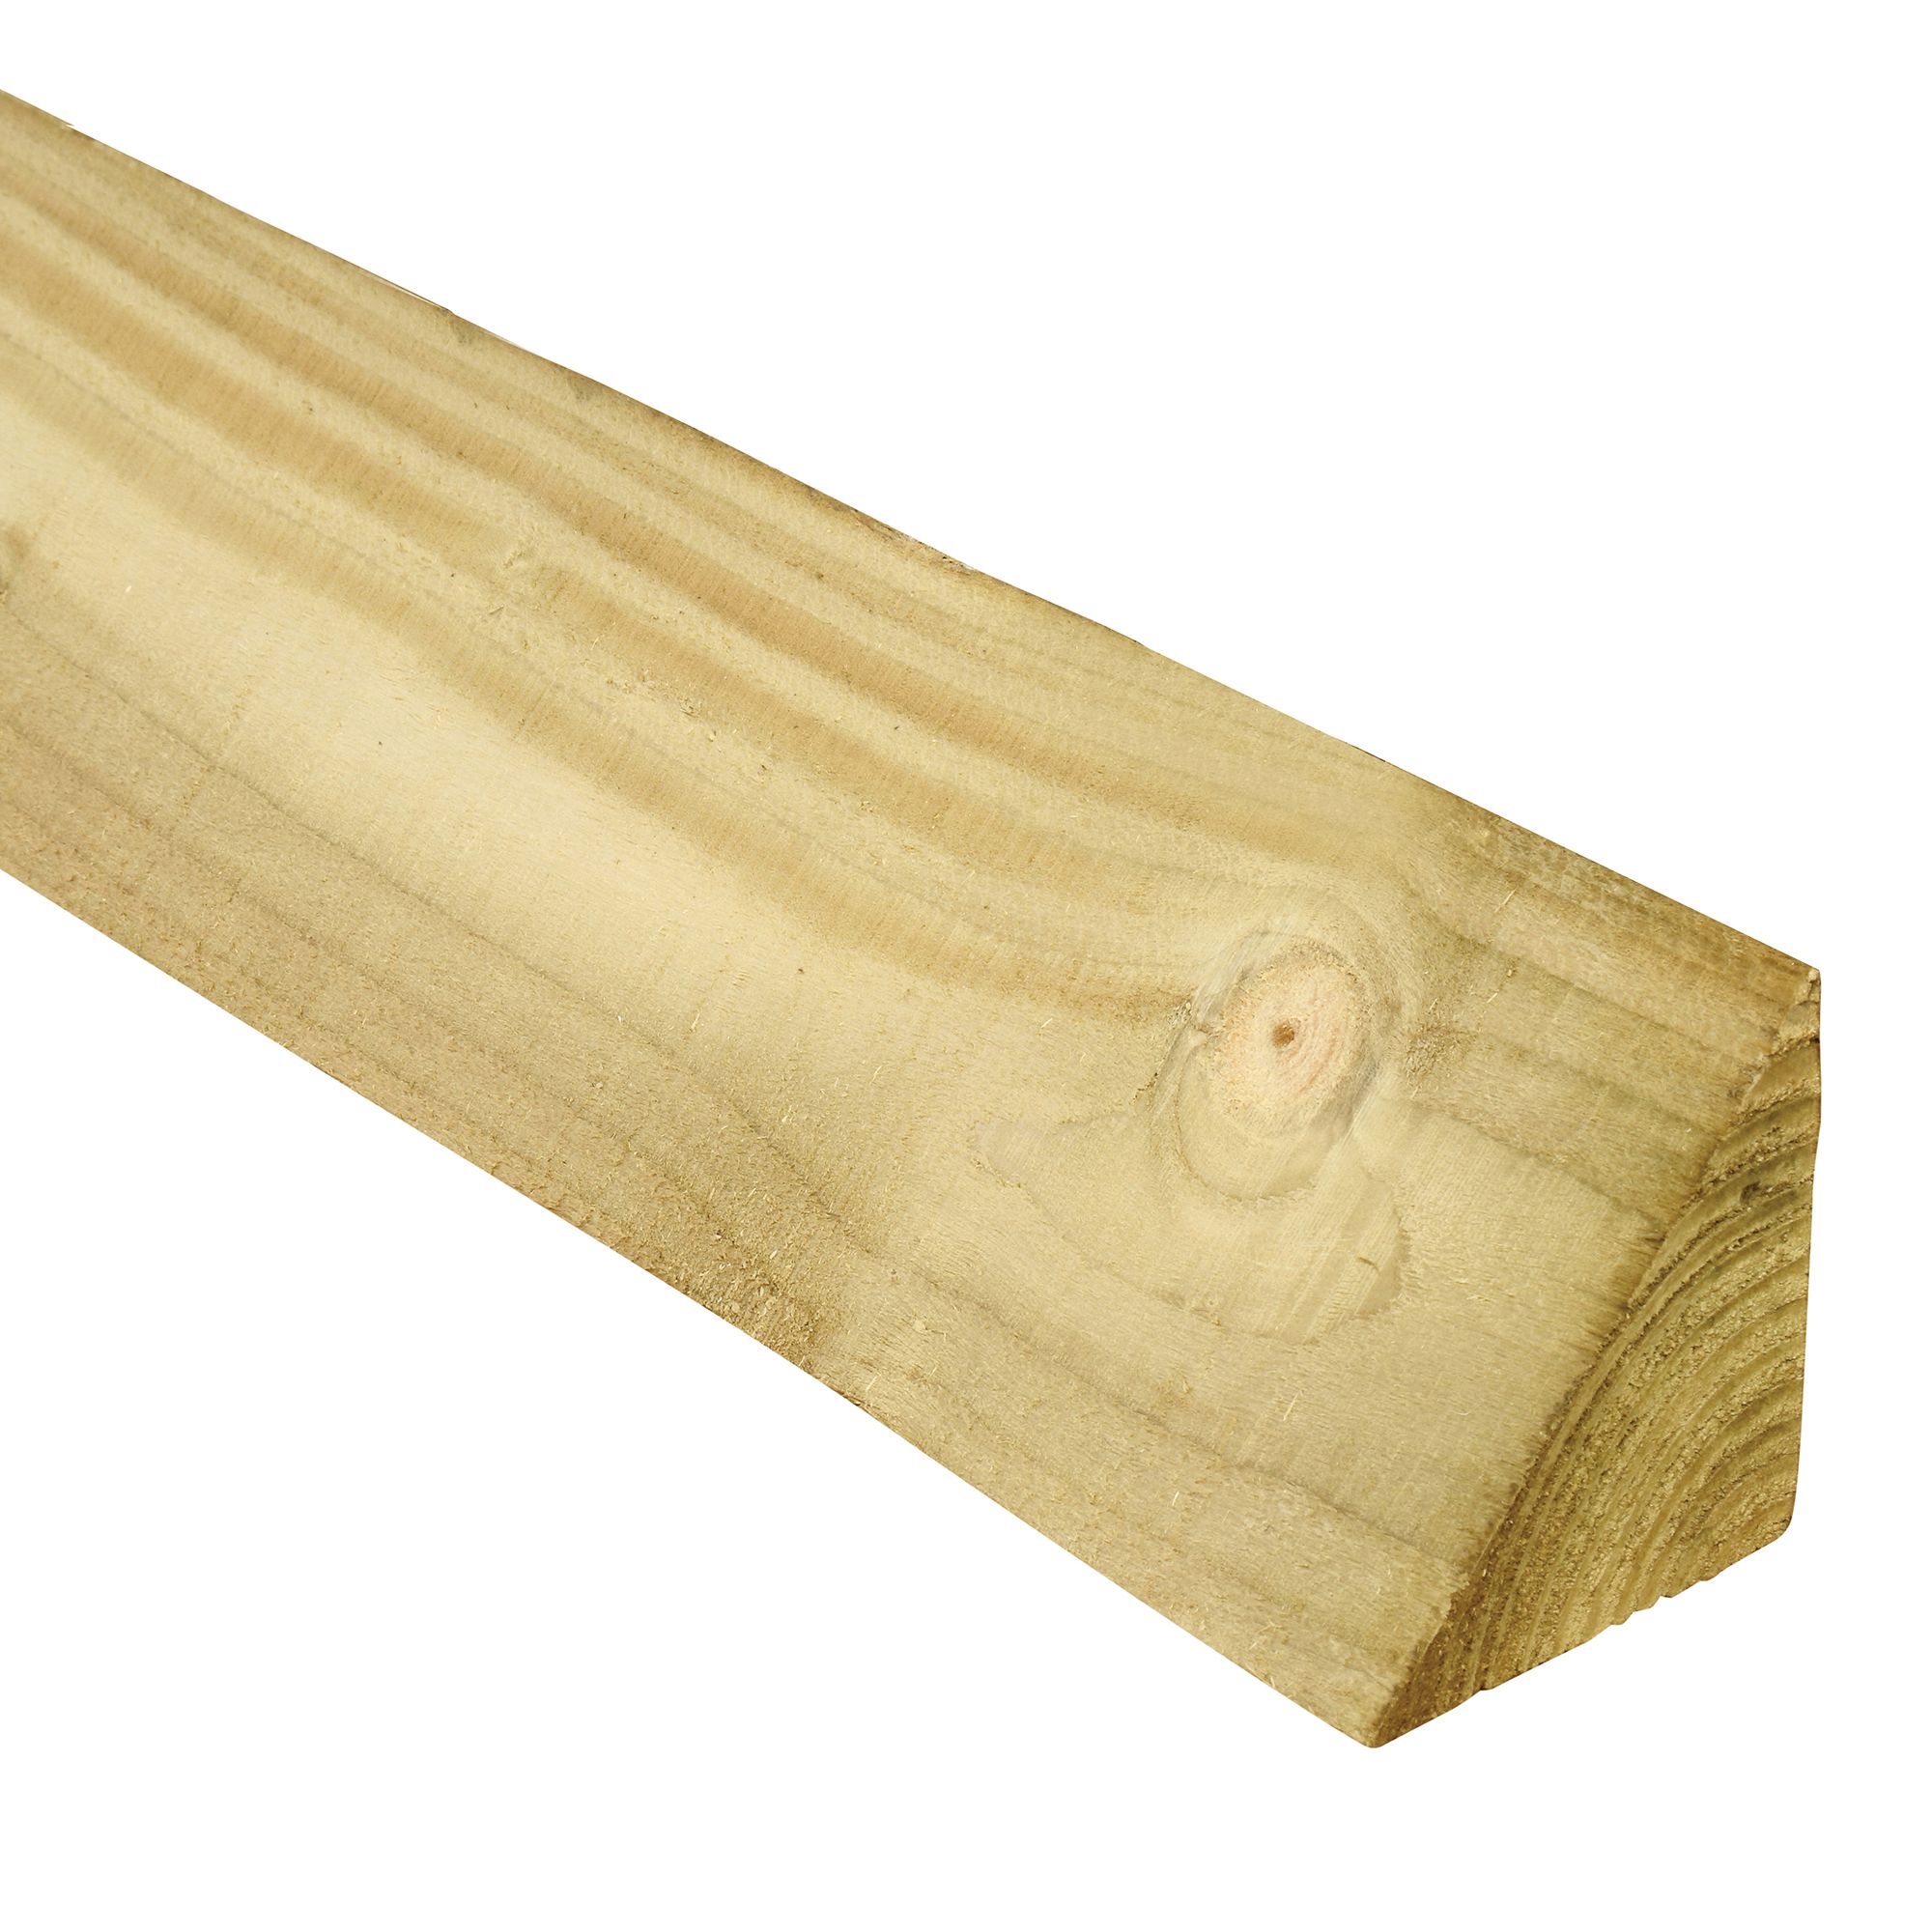 Image of Wickes Arris Rail - 75 x 75 x 100mm x 2.4m Pack of 4